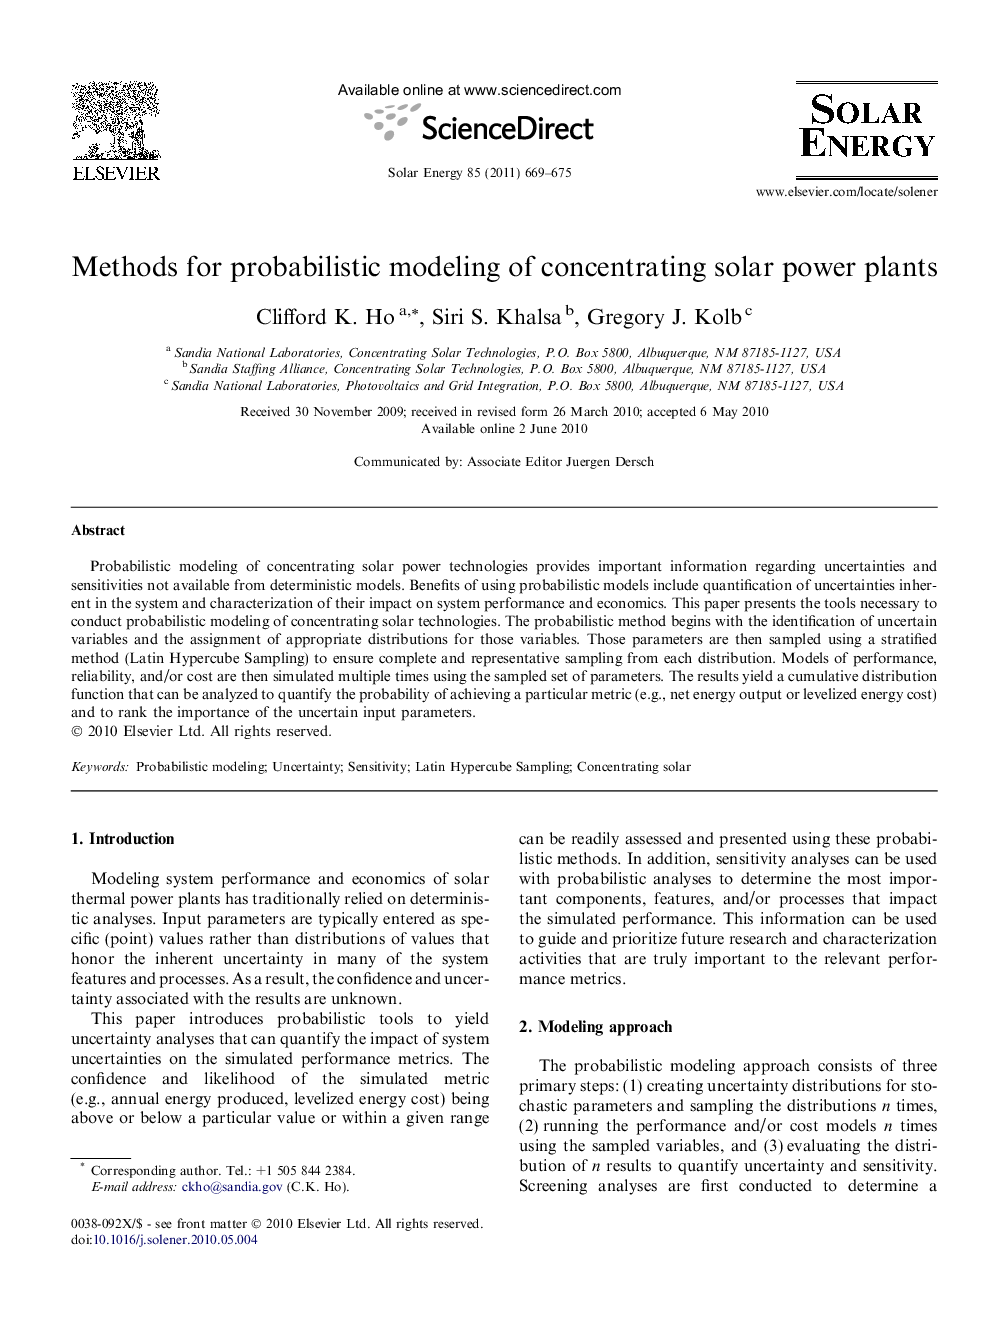 Methods for probabilistic modeling of concentrating solar power plants